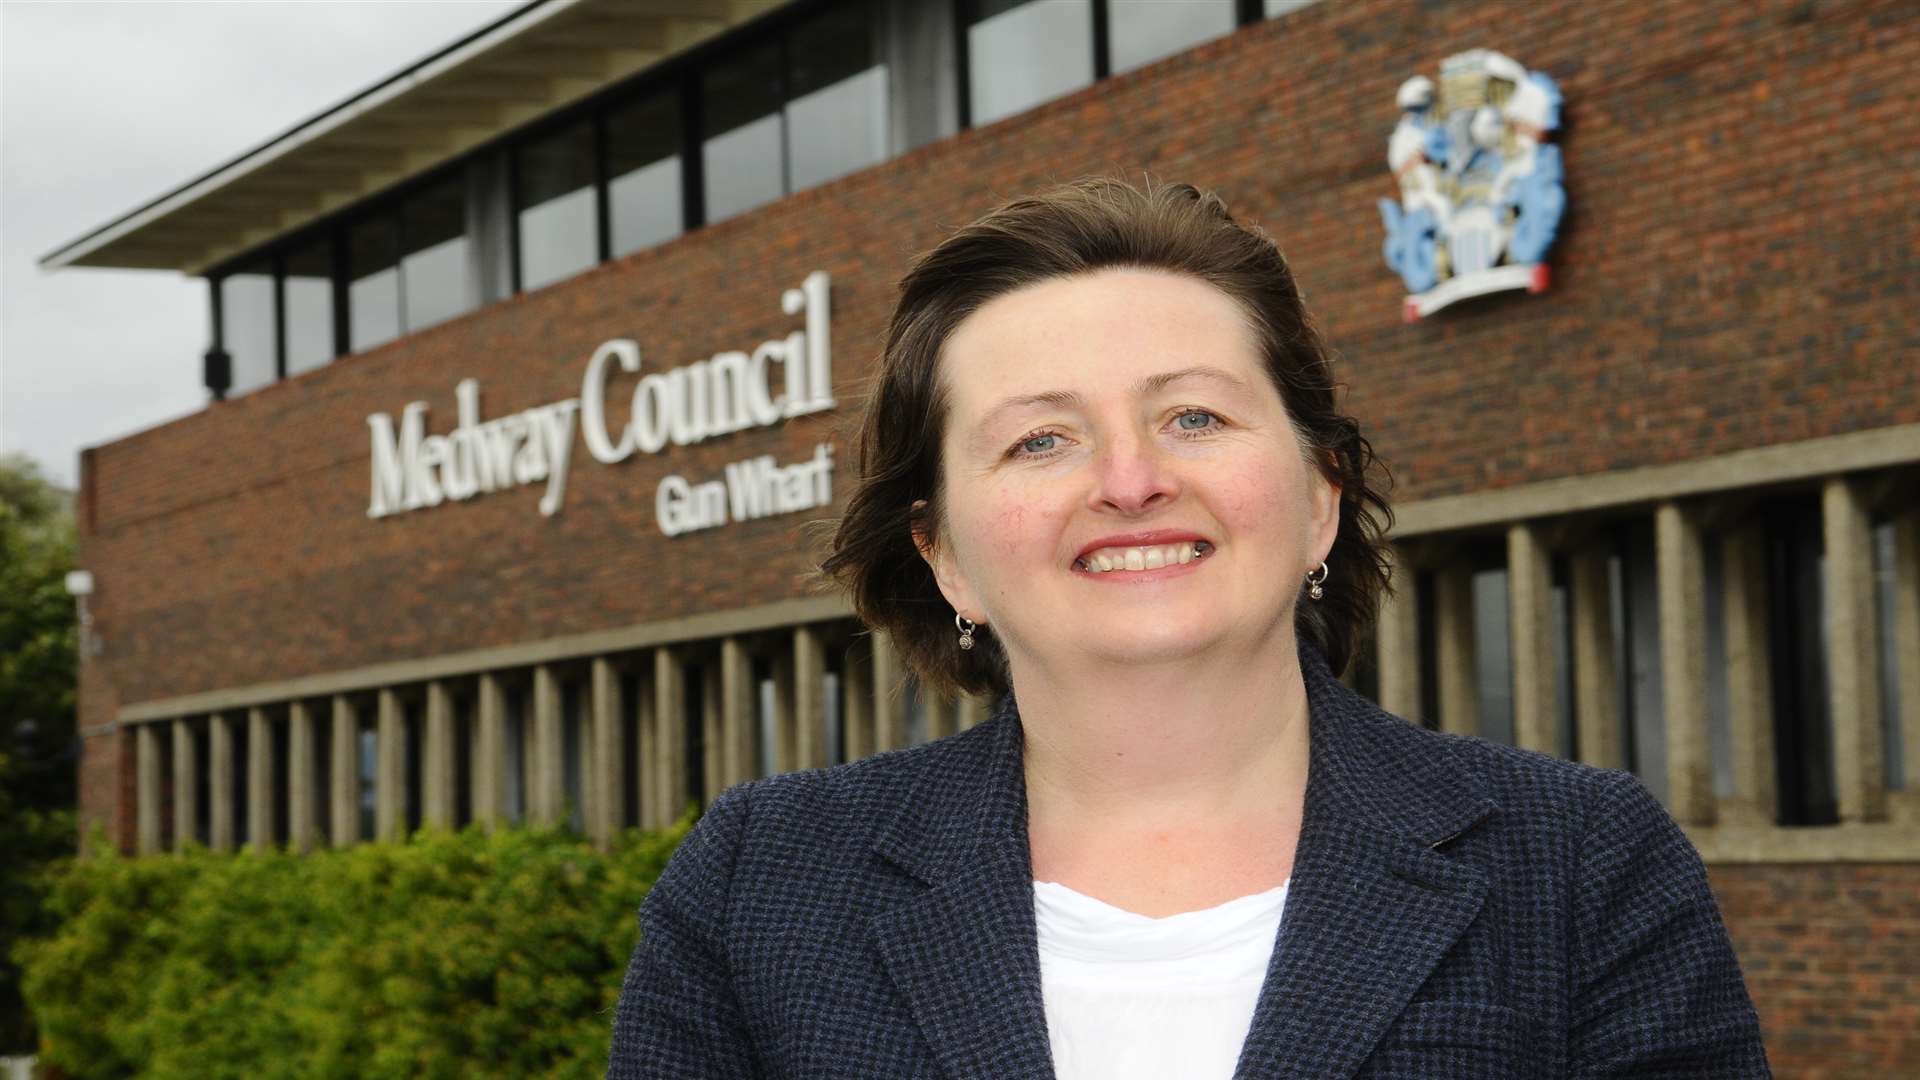 Barbara Peacock, director of children's services for Medway Council